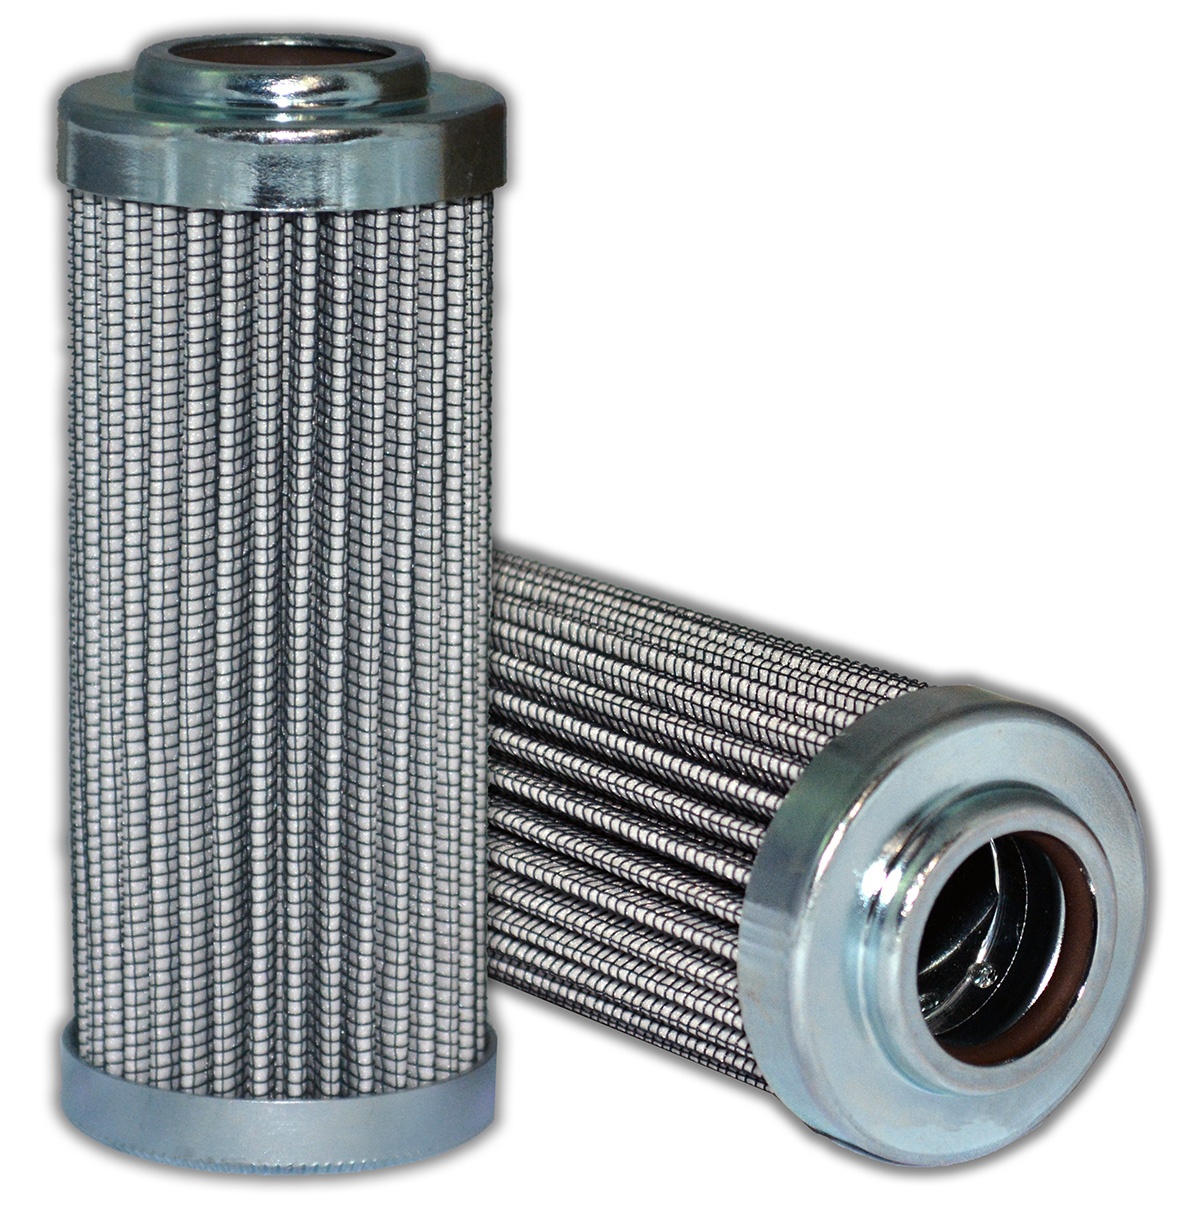 Interchange Hydraulic Filter, Glass, 25 Micron Rating, Viton Seal, 4.29 Inch Height